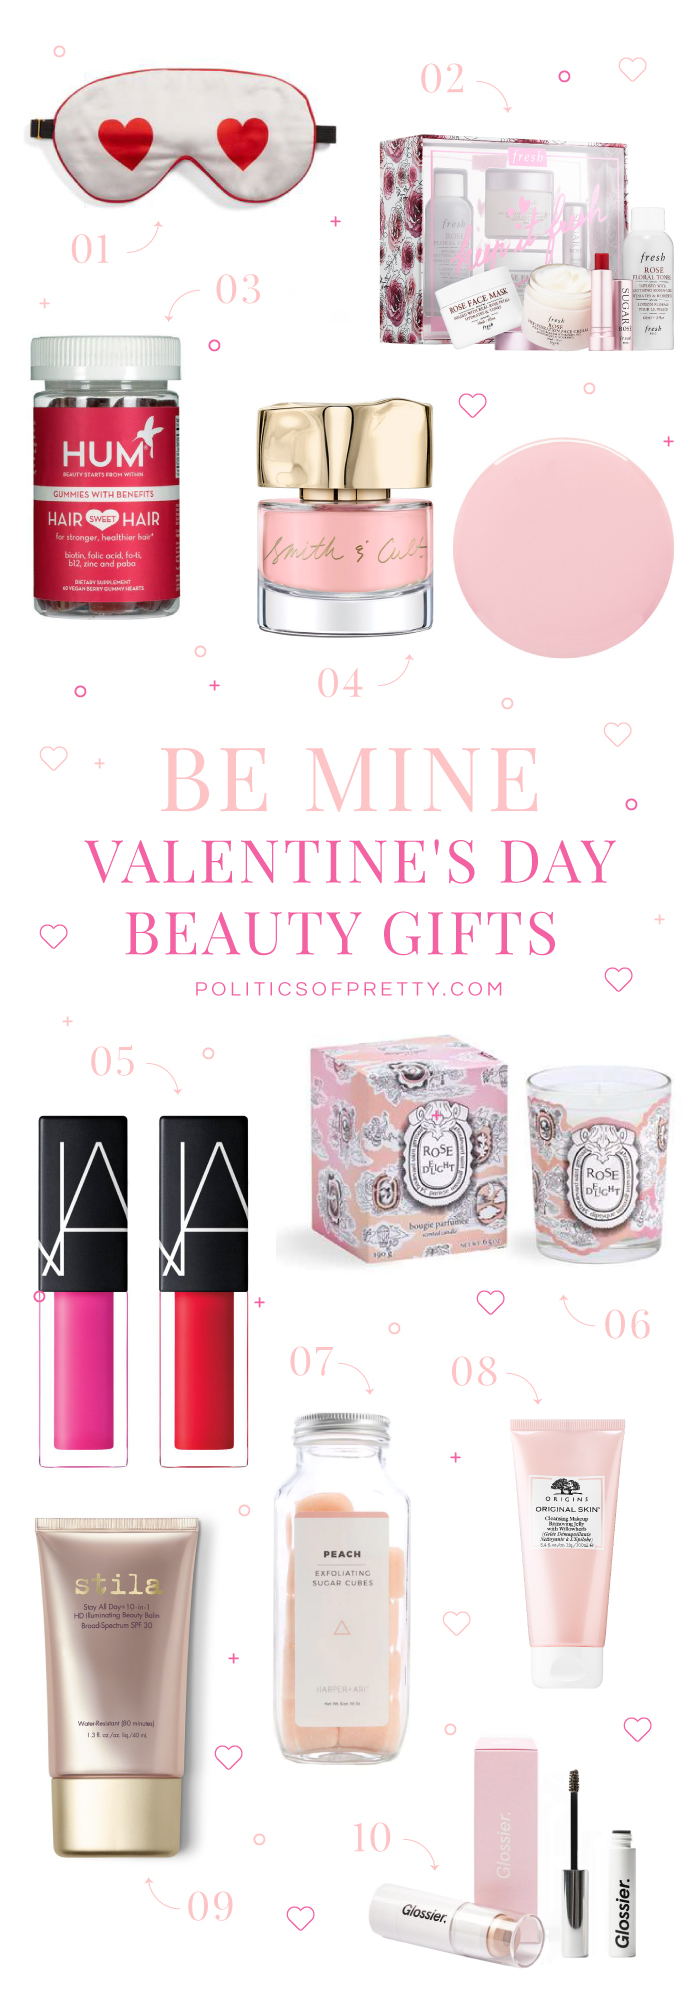 Valentine's Day beauty gift ideas